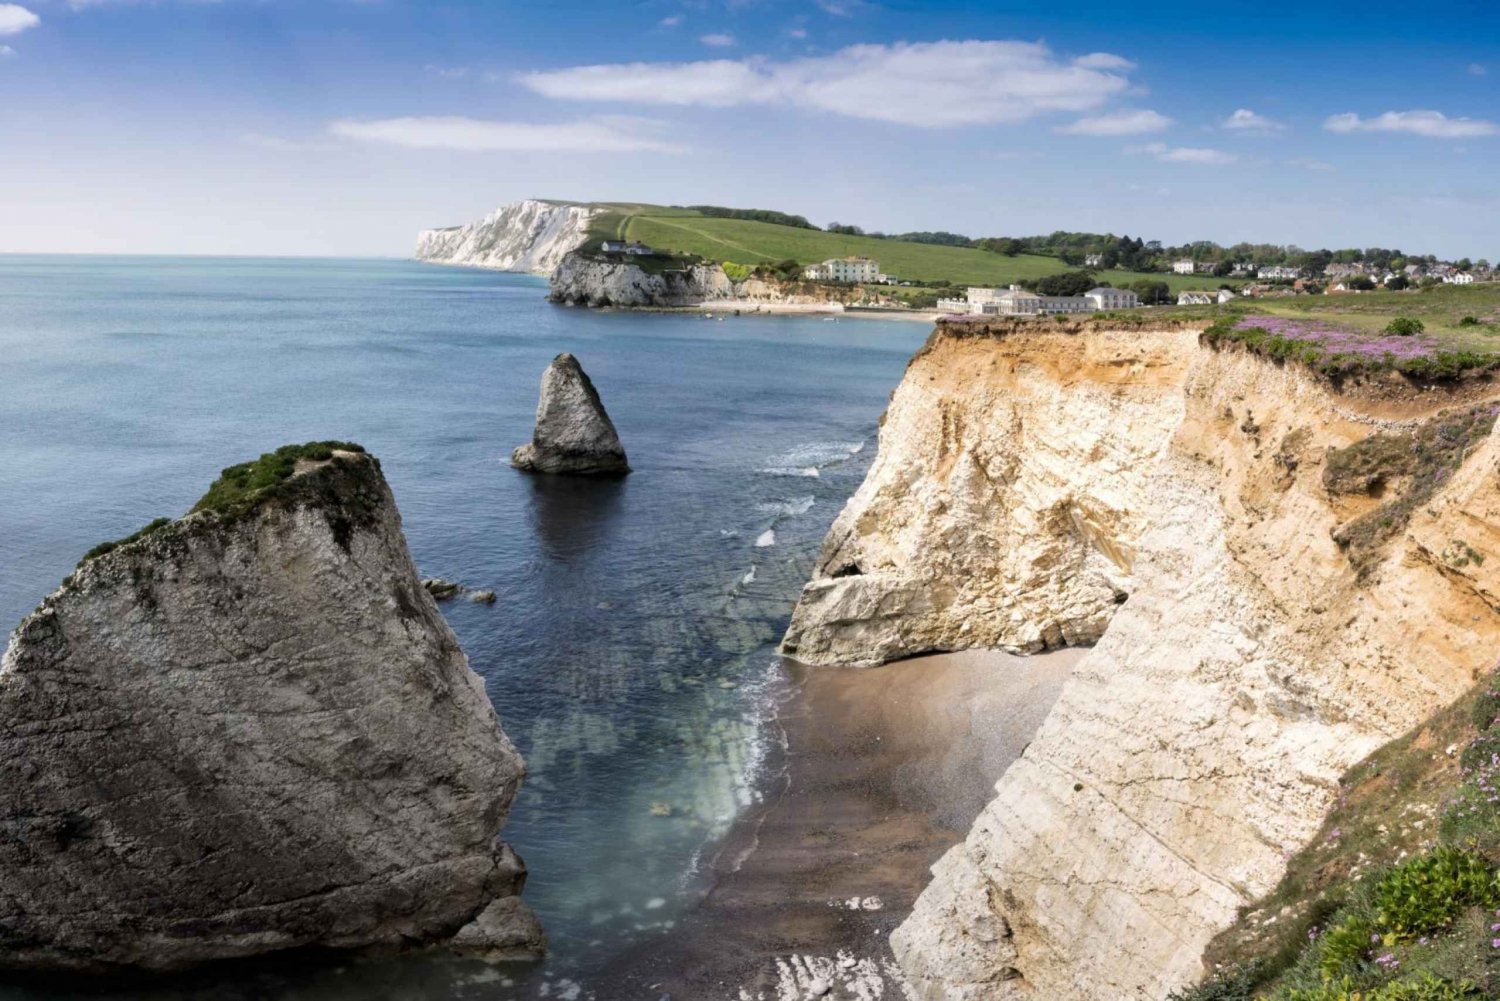 3-day Isle of Wight & the Southern Coast Small-Group Tour